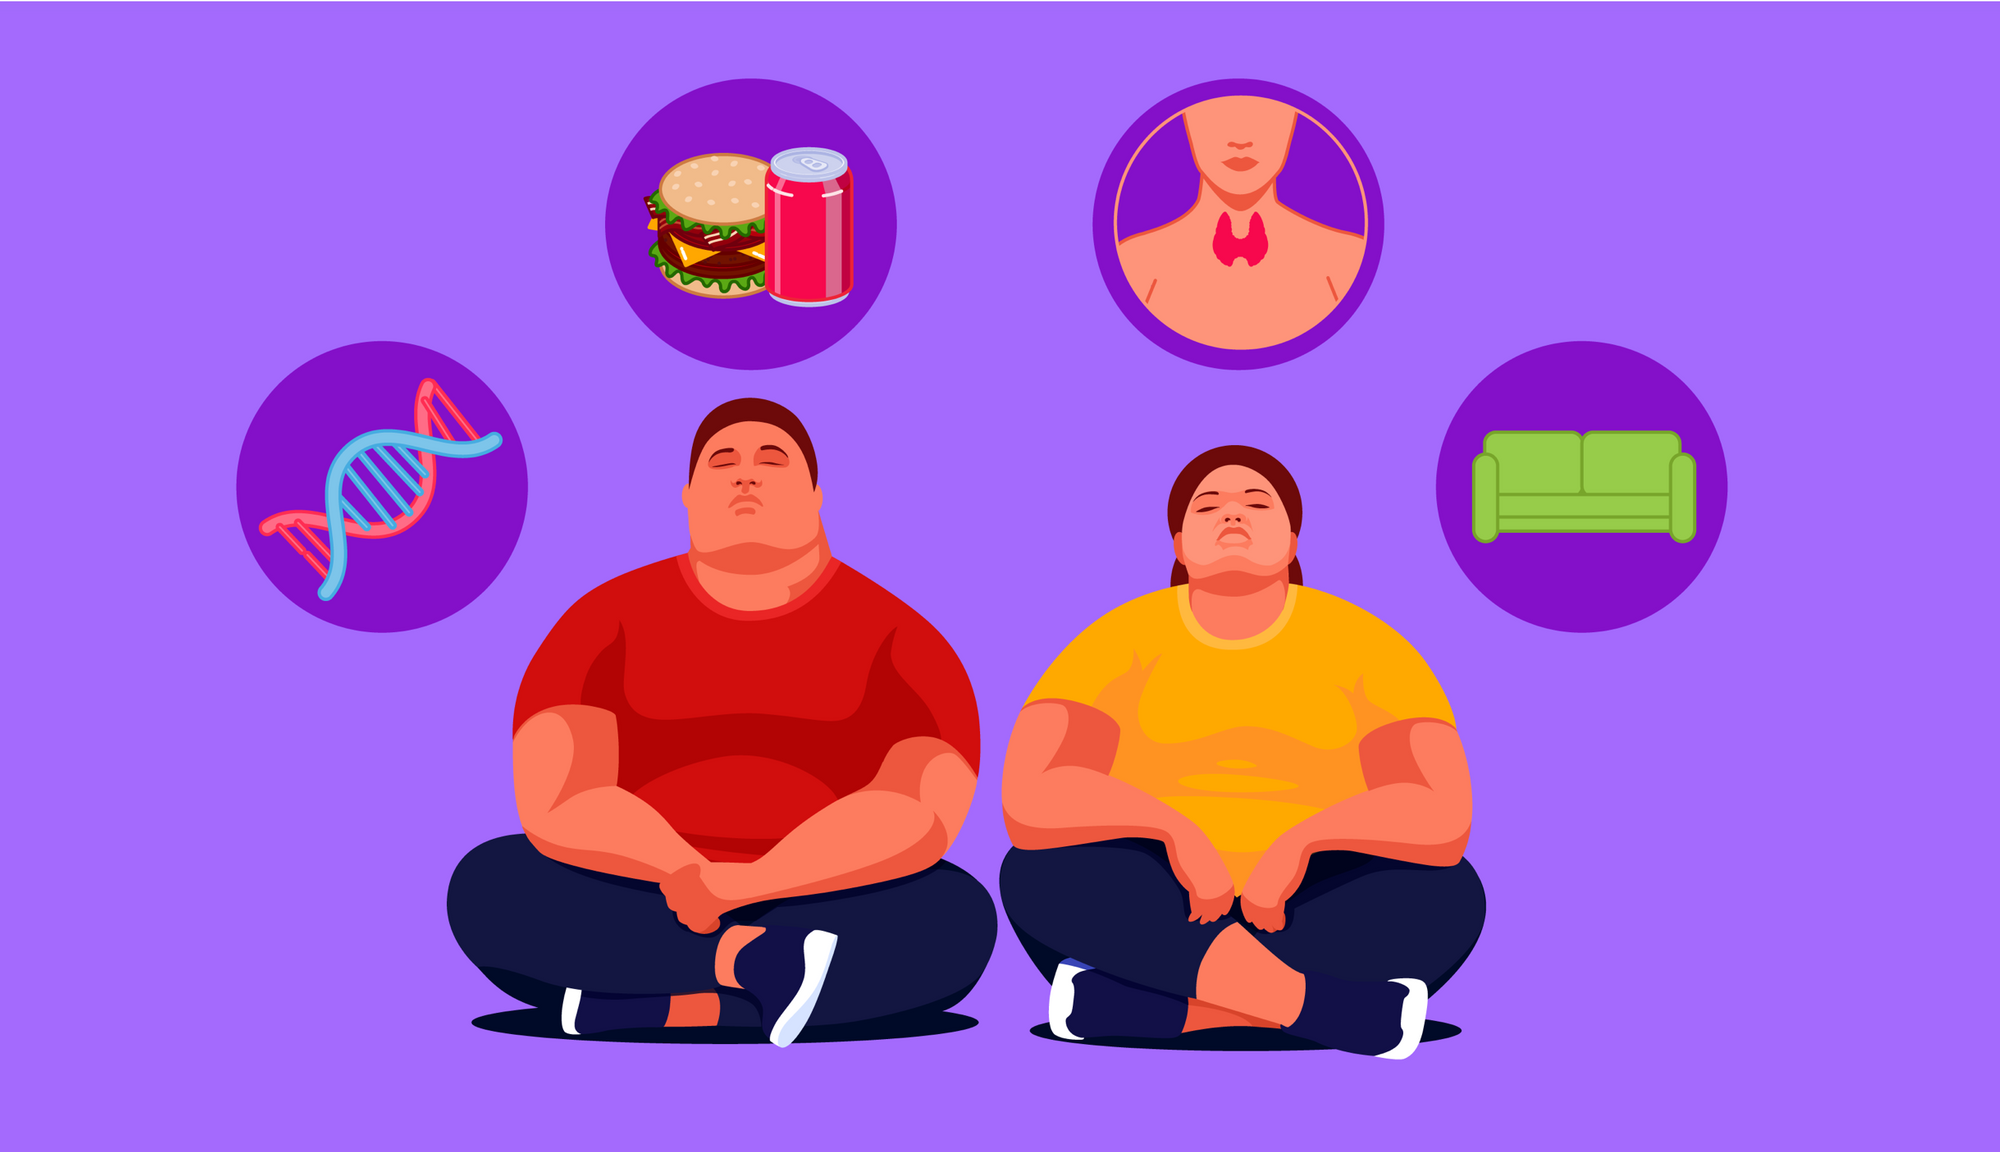 A Guide To Obesity: How To Identify, Prevent, And Treat The Condition